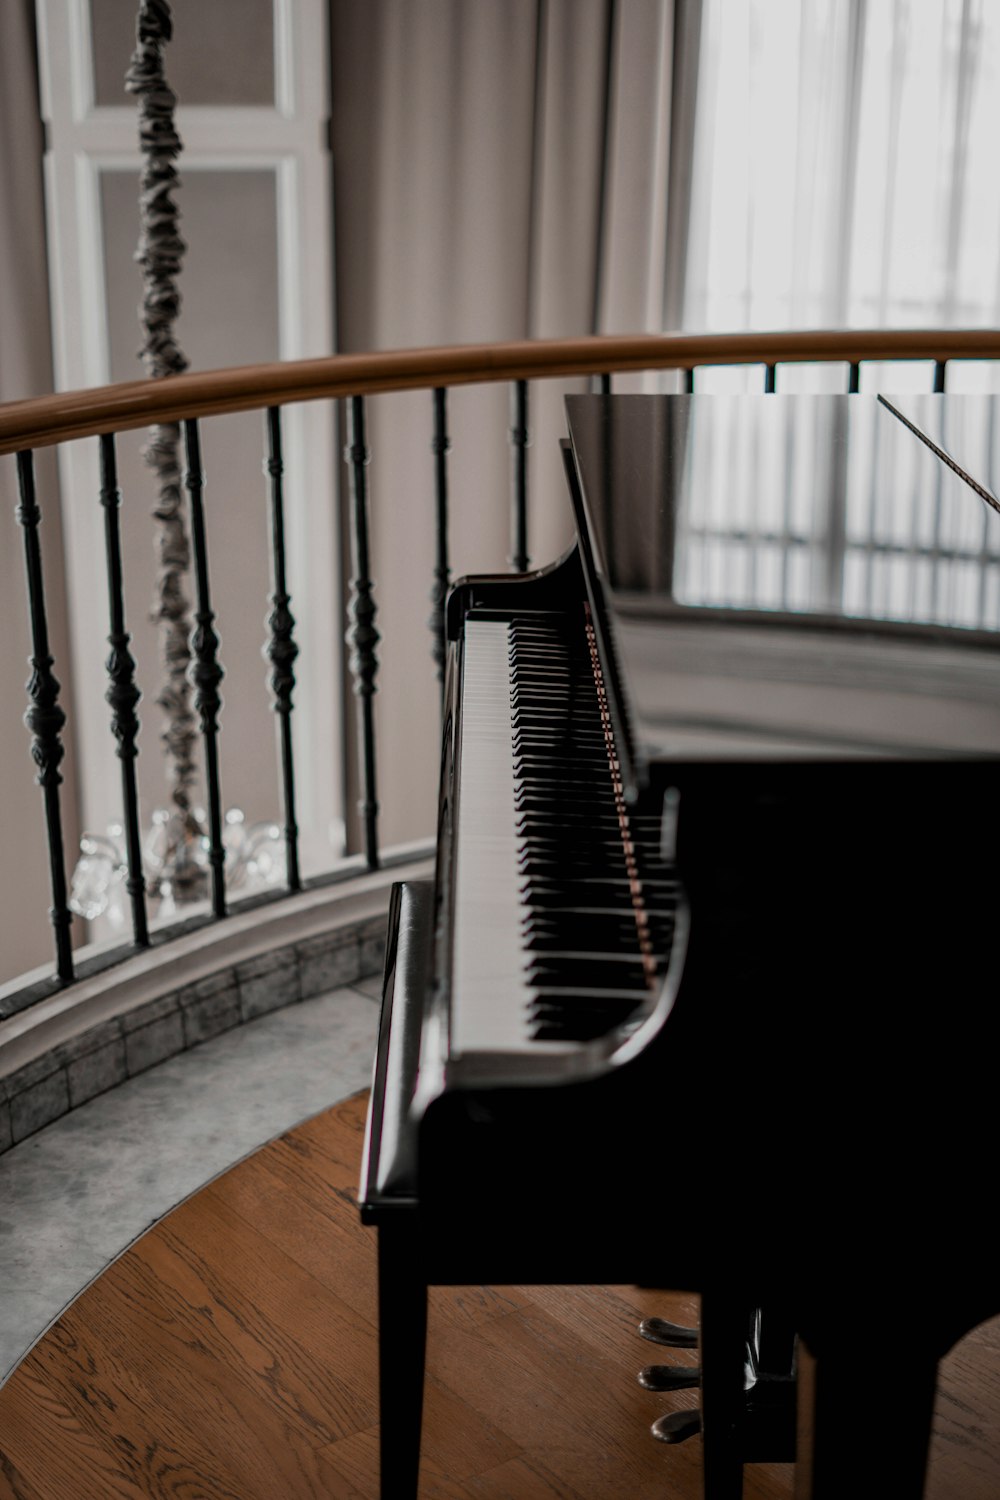 black upright piano on brown wooden floor